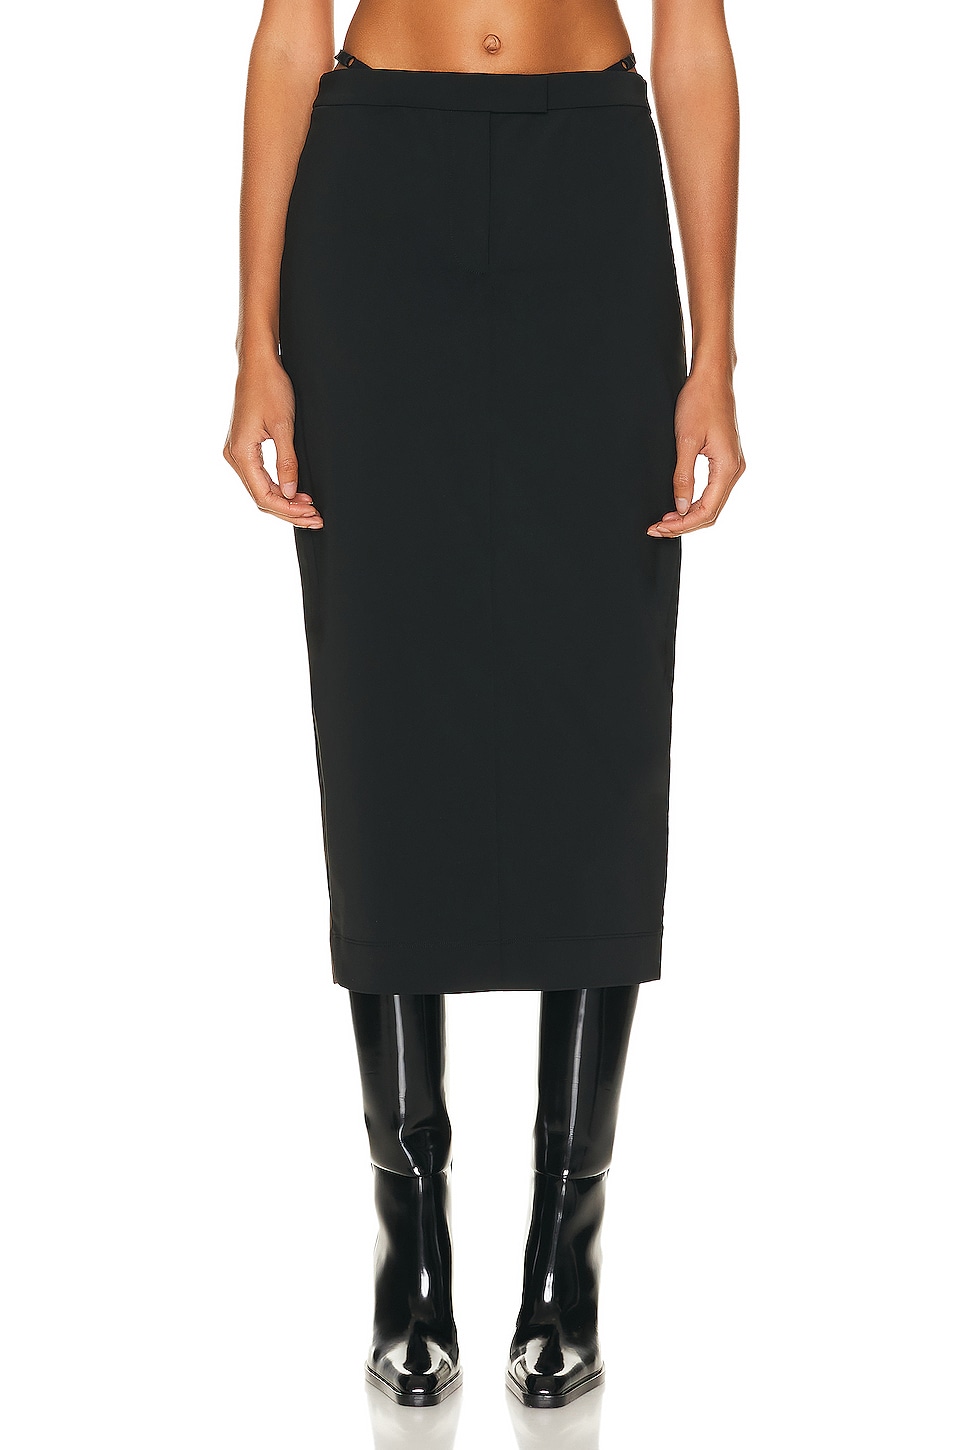 Image 1 of Alexander Wang Fitted G String Long Skirt in Black